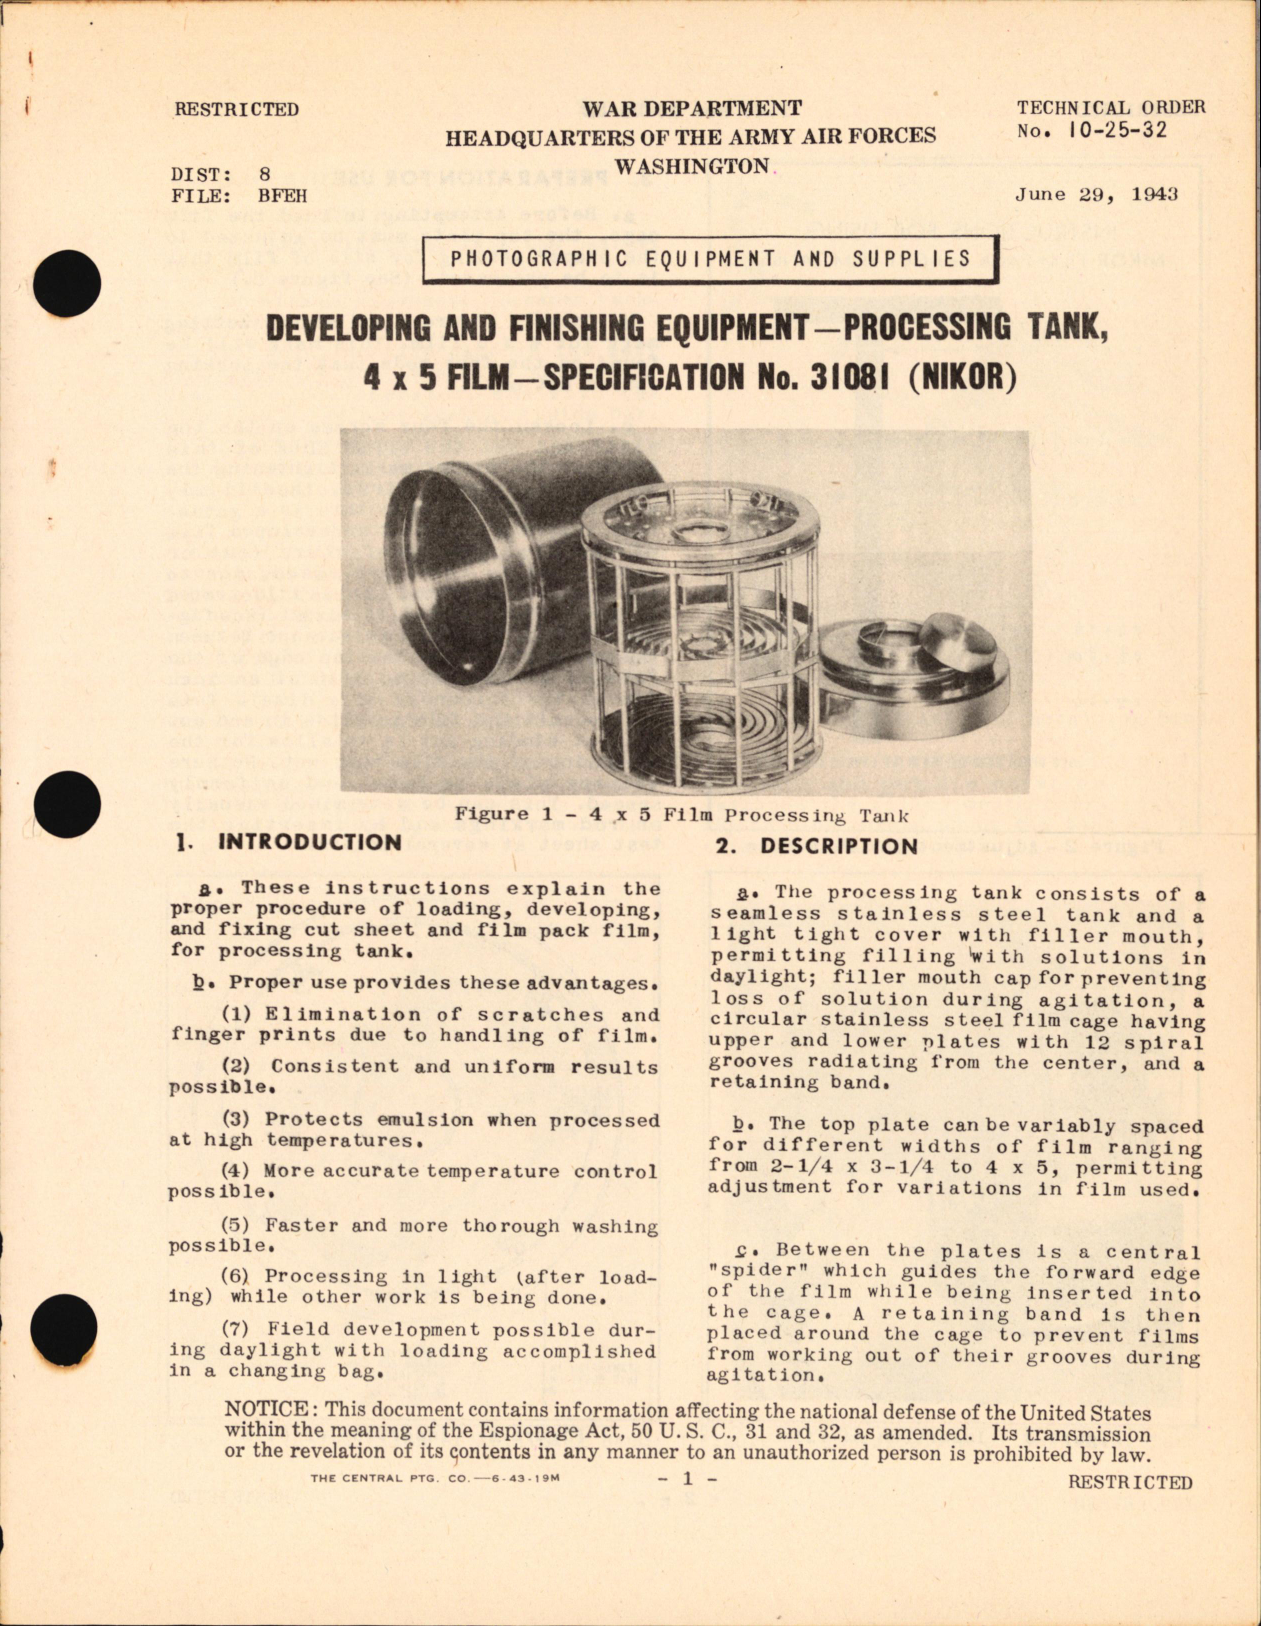 Sample page 1 from AirCorps Library document: Processing Tank for 4 x 5 Film - Specification No. 31081 (Nikor)